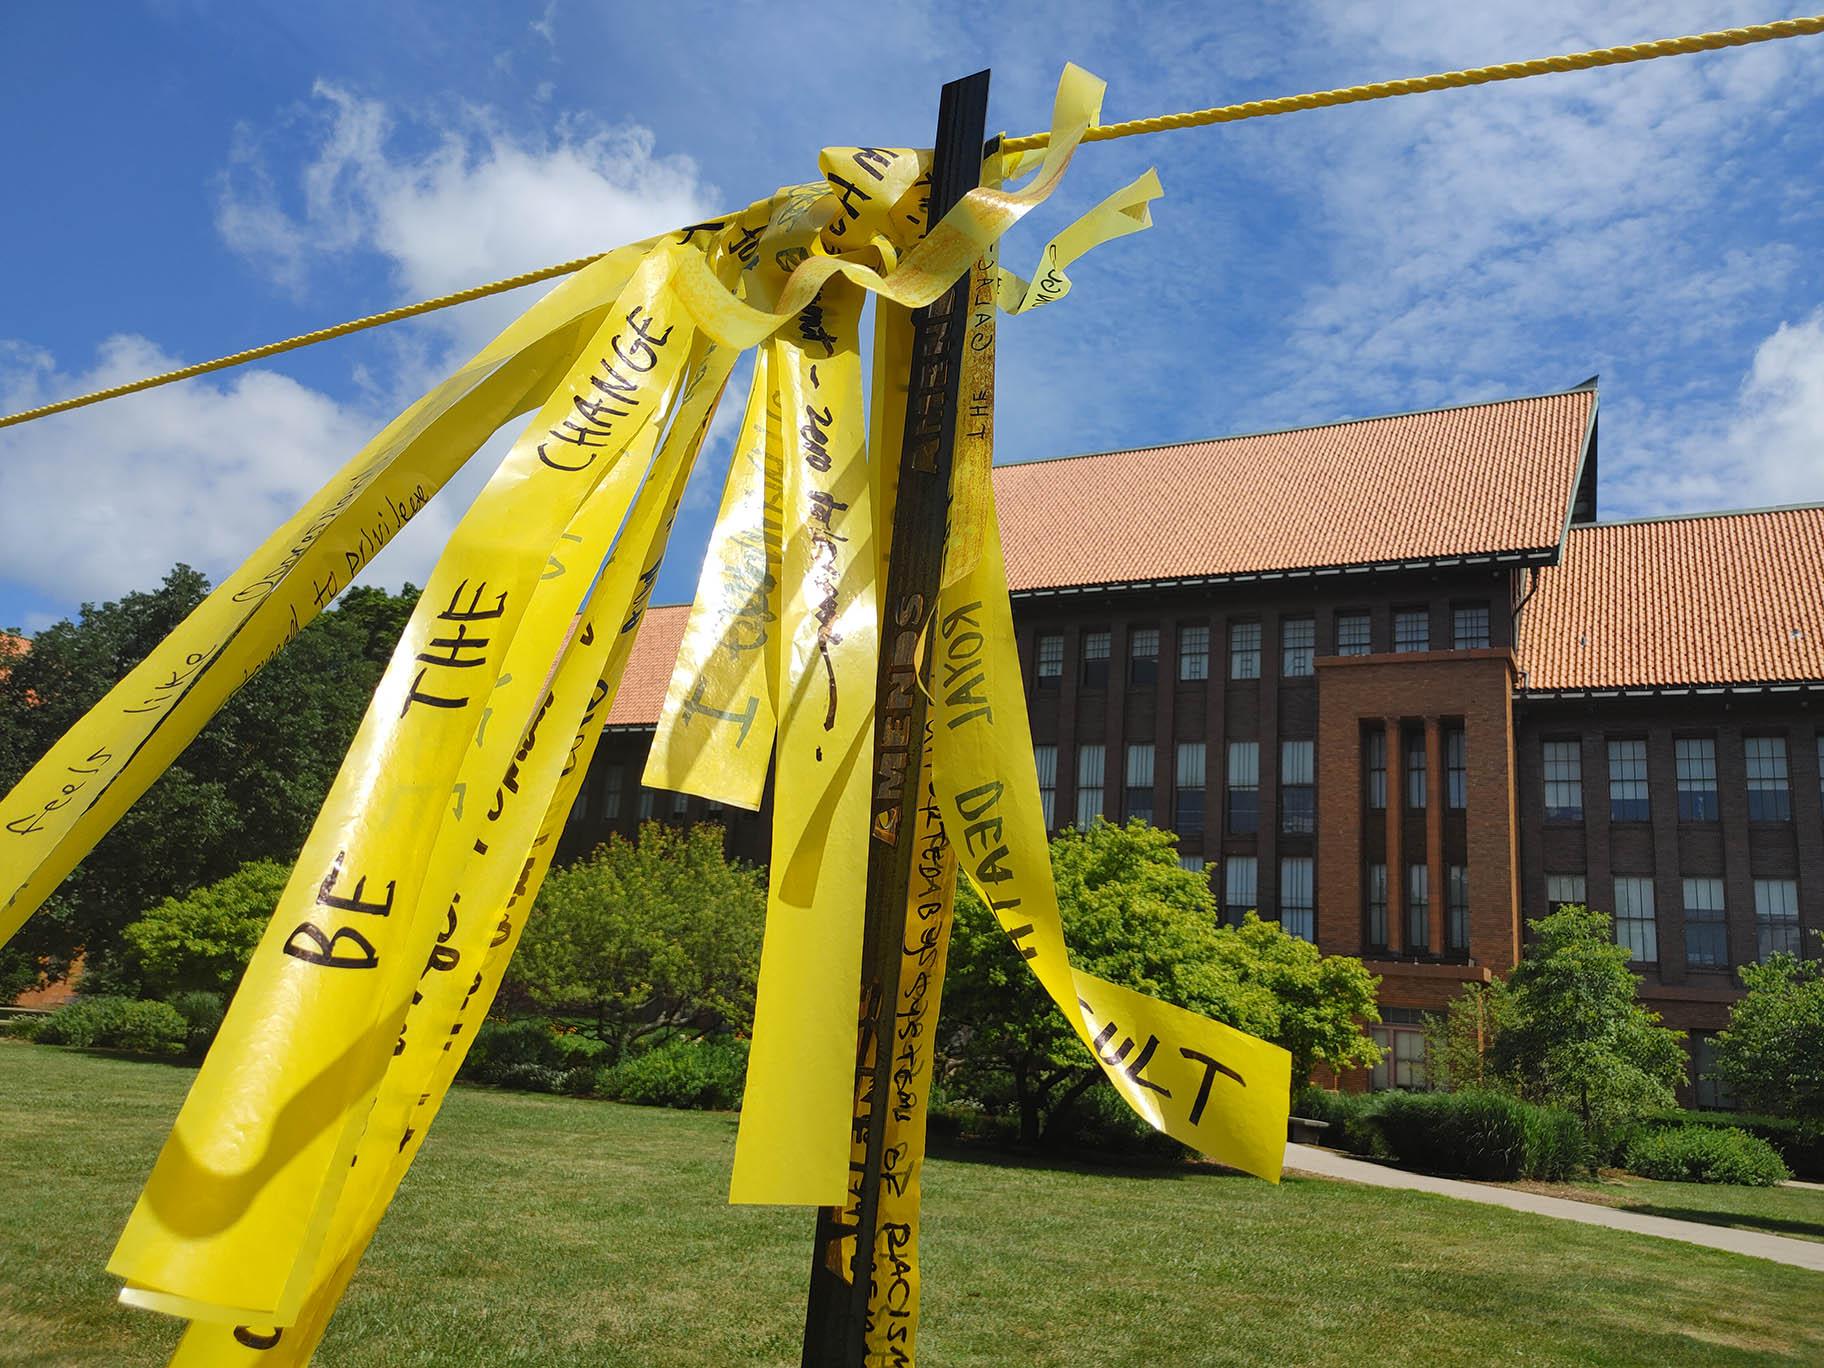 Handwritten messages on yellow ribbon comprise “Dirty Laundry” on the lawn at Schurz High School. (Erica Gunderson / WTTW News)